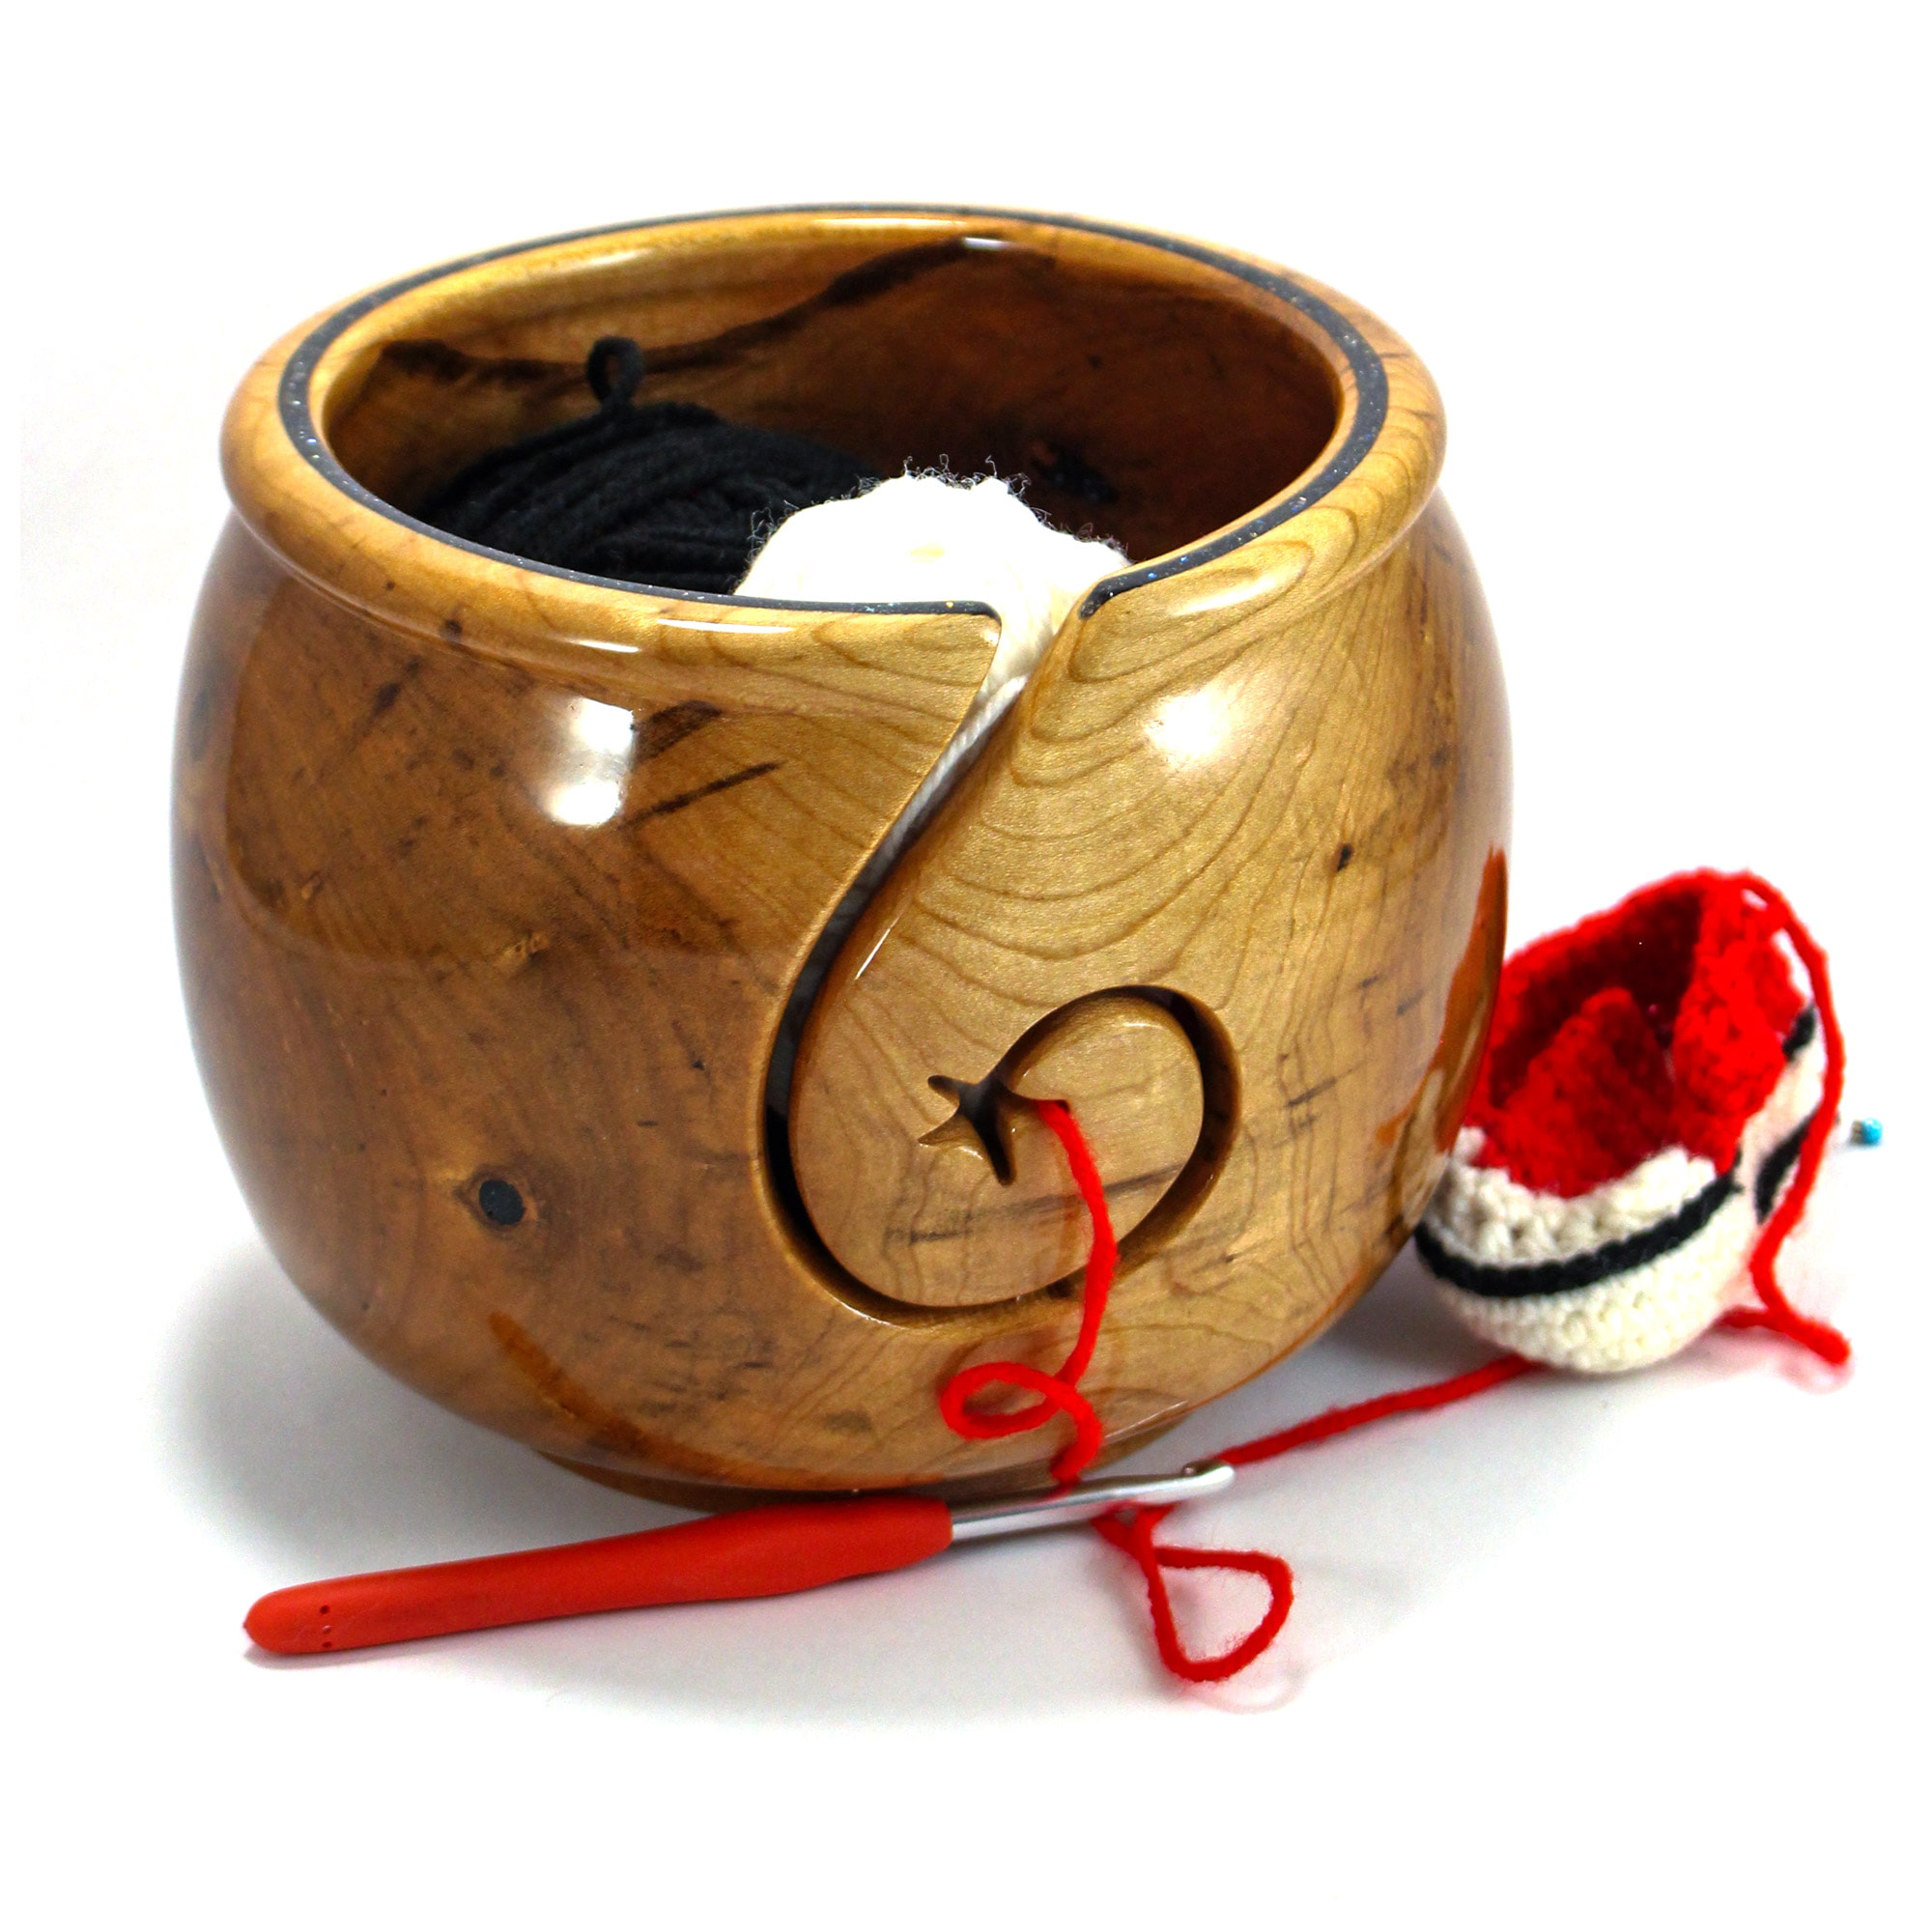 XXXL Yarn Bowl, Cherry Harwood, GIANT! For Knitting, Crochet, Yarning,  Sparkle Inlay One-of-a-kind, Signed #1149